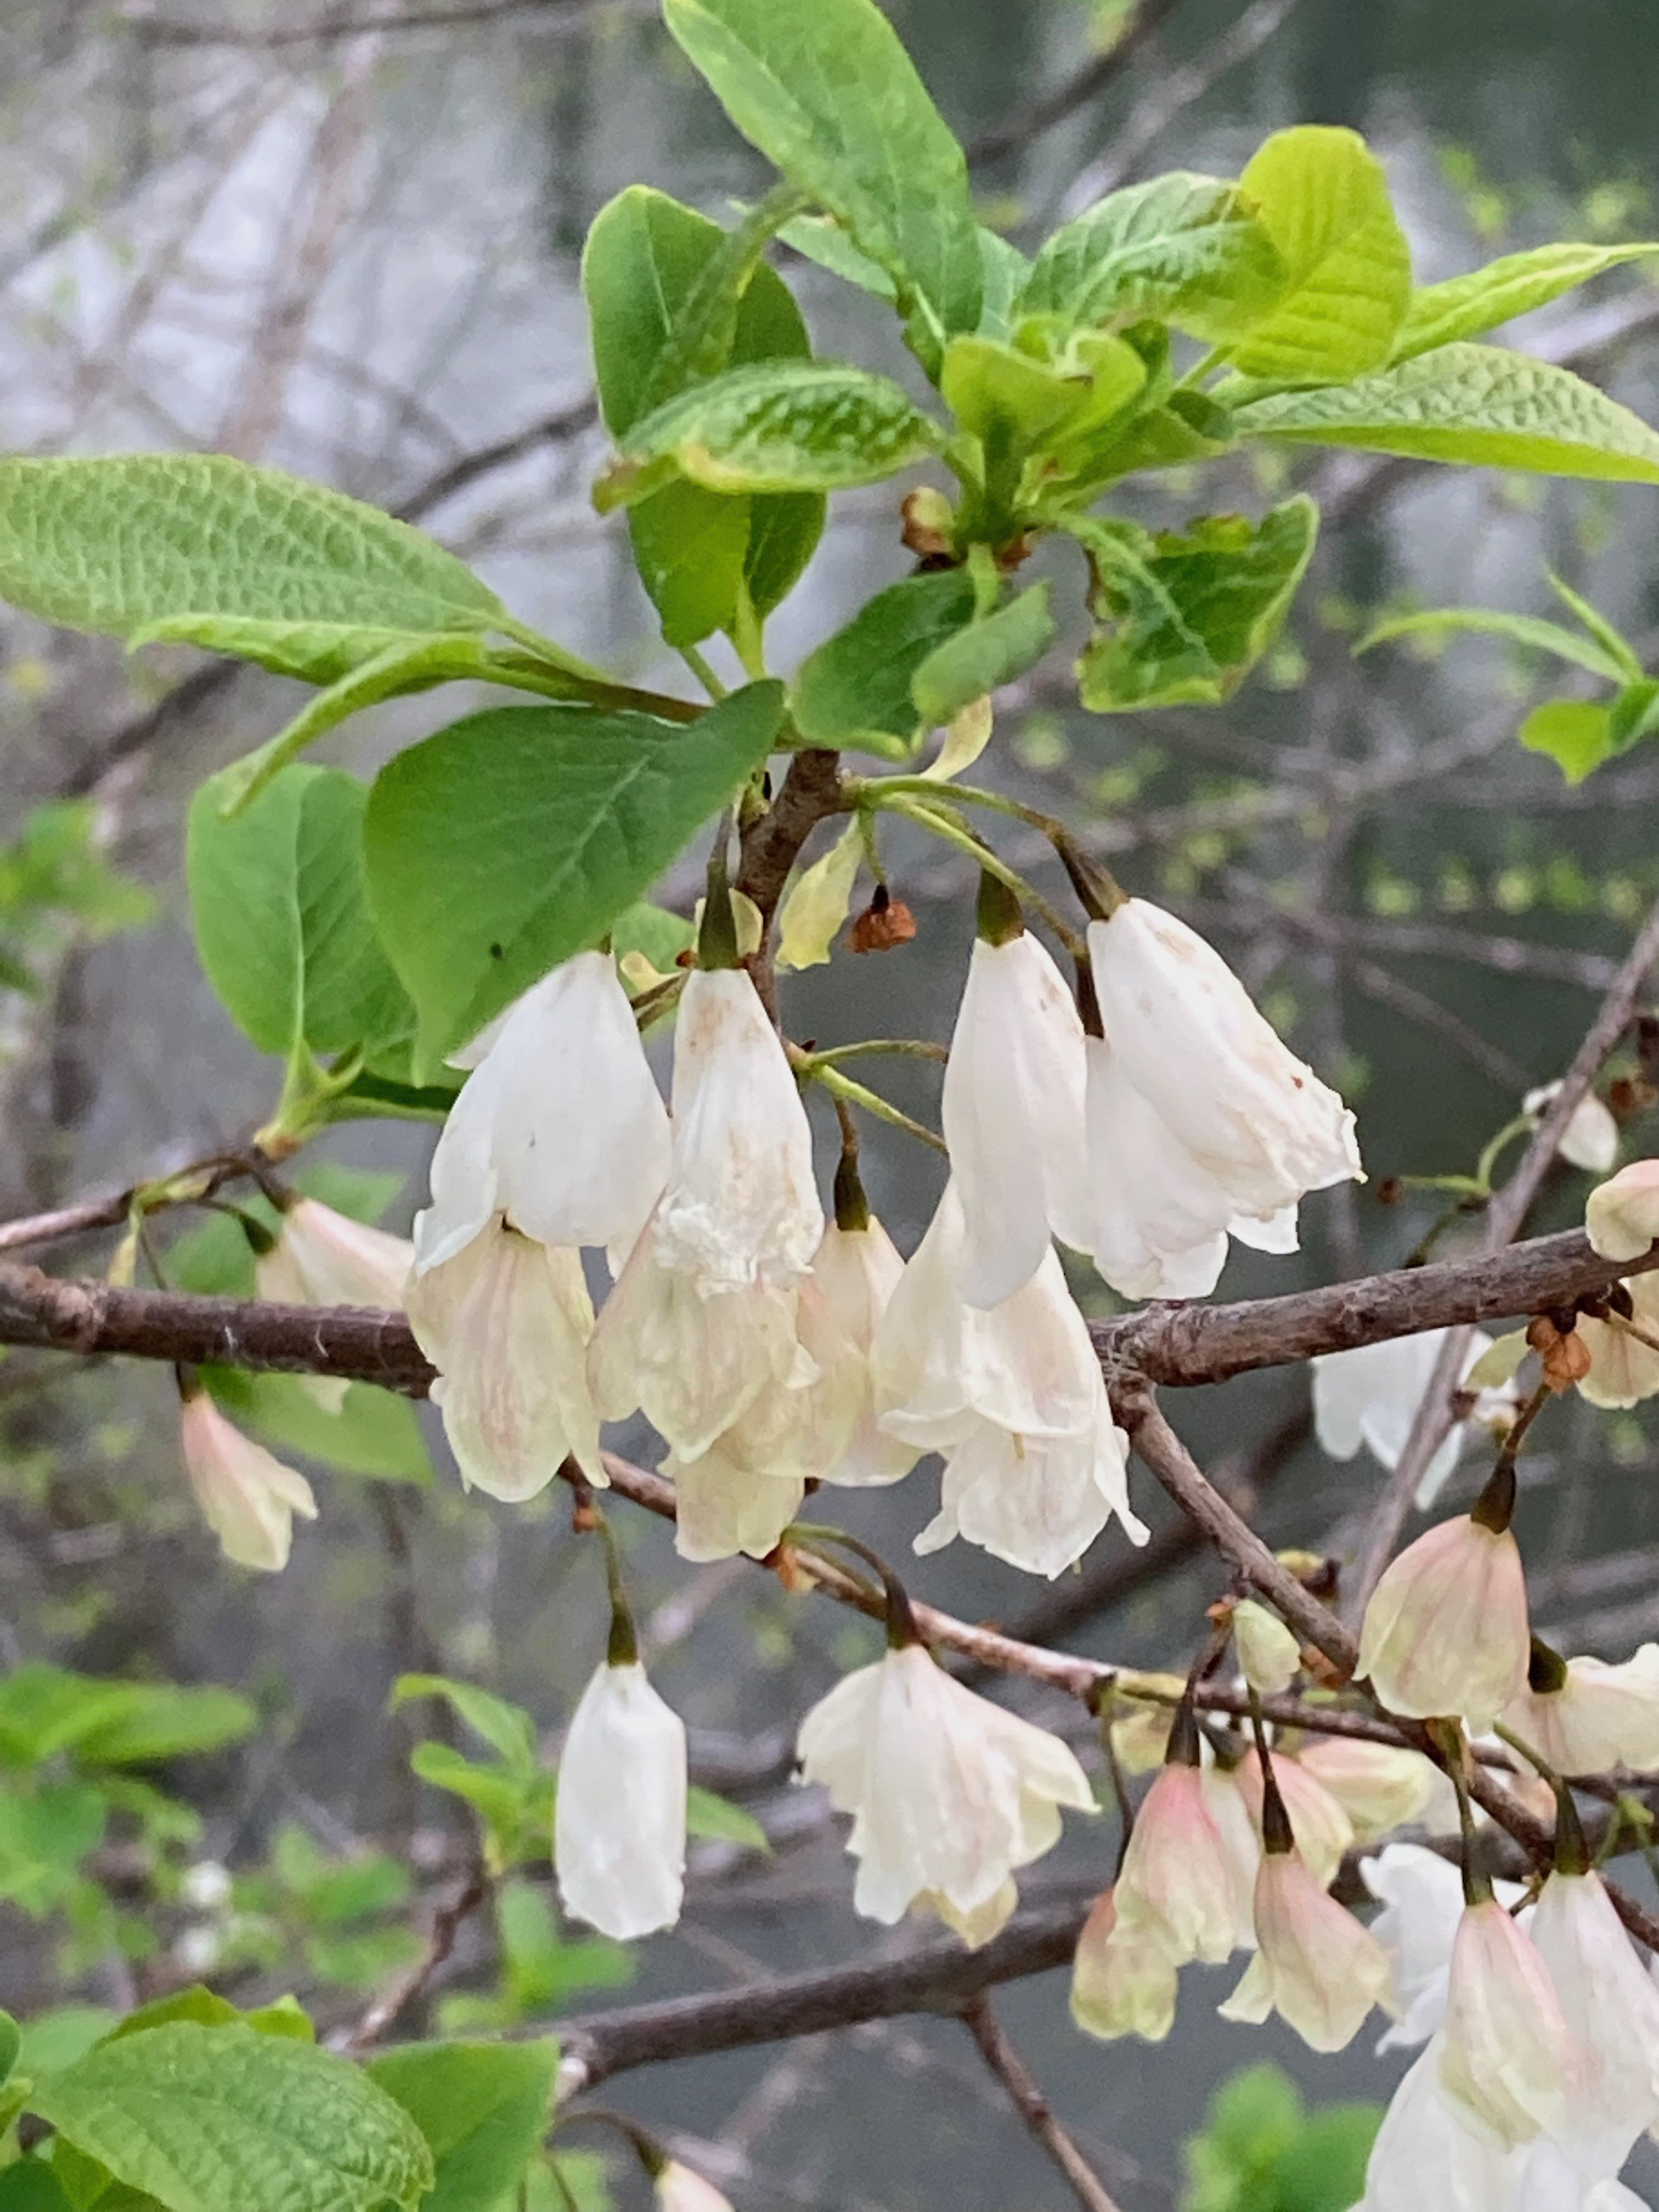 The Scientific Name is Halesia tetraptera [split from Halesia carolina]. You will likely hear them called Common Silverbell, Mountain Silverbell, Snowdrop-tree. This picture shows the White, pink-tinged  pendulous, bell-shaped flowers. of Halesia tetraptera [split from Halesia carolina]